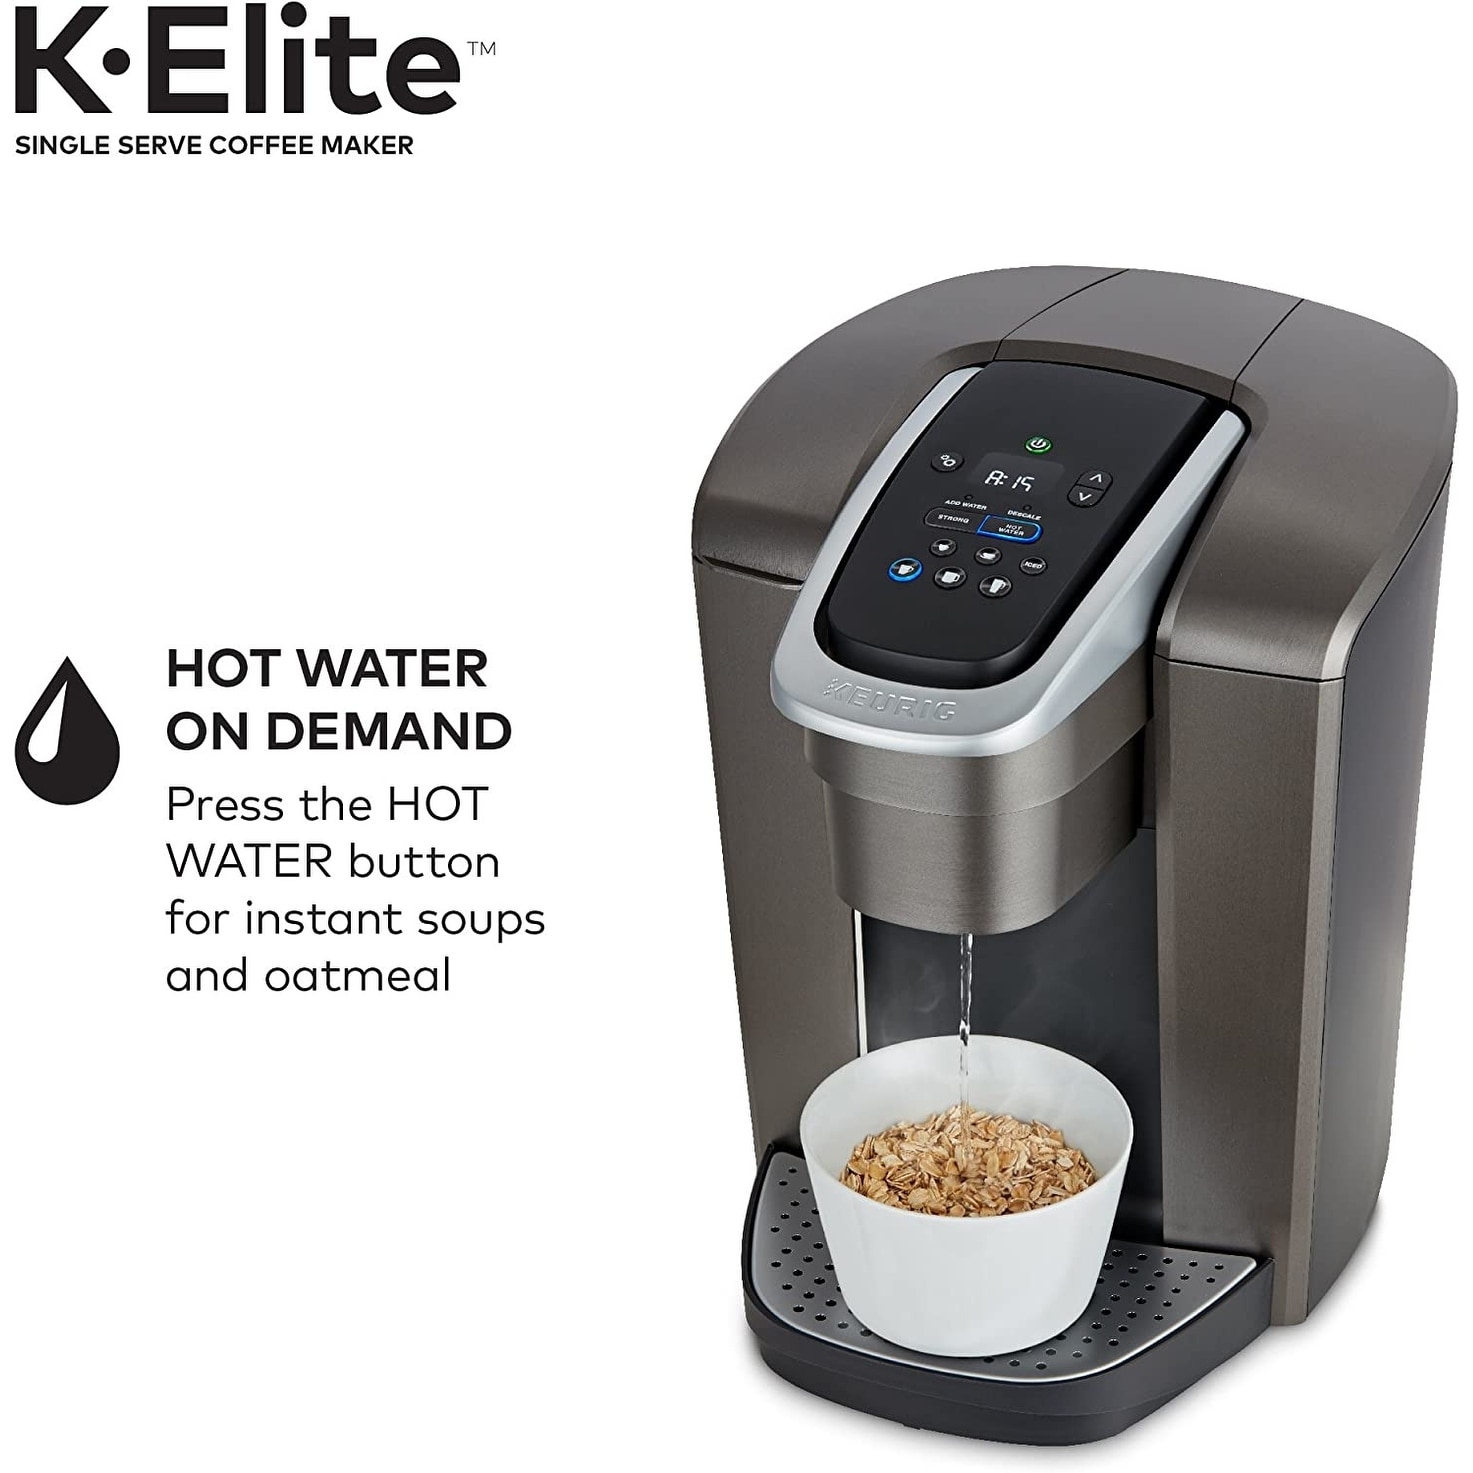 https://ak1.ostkcdn.com/images/products/is/images/direct/1e6f97297be7b3d1d4914faa044dab2af60d811b/Keurig-K-Elite-Coffee-Maker%2C-Single-Serve-K-Cup-Pod-Coffee-Brewer%2C-With-Iced-Coffee-Capability.jpg